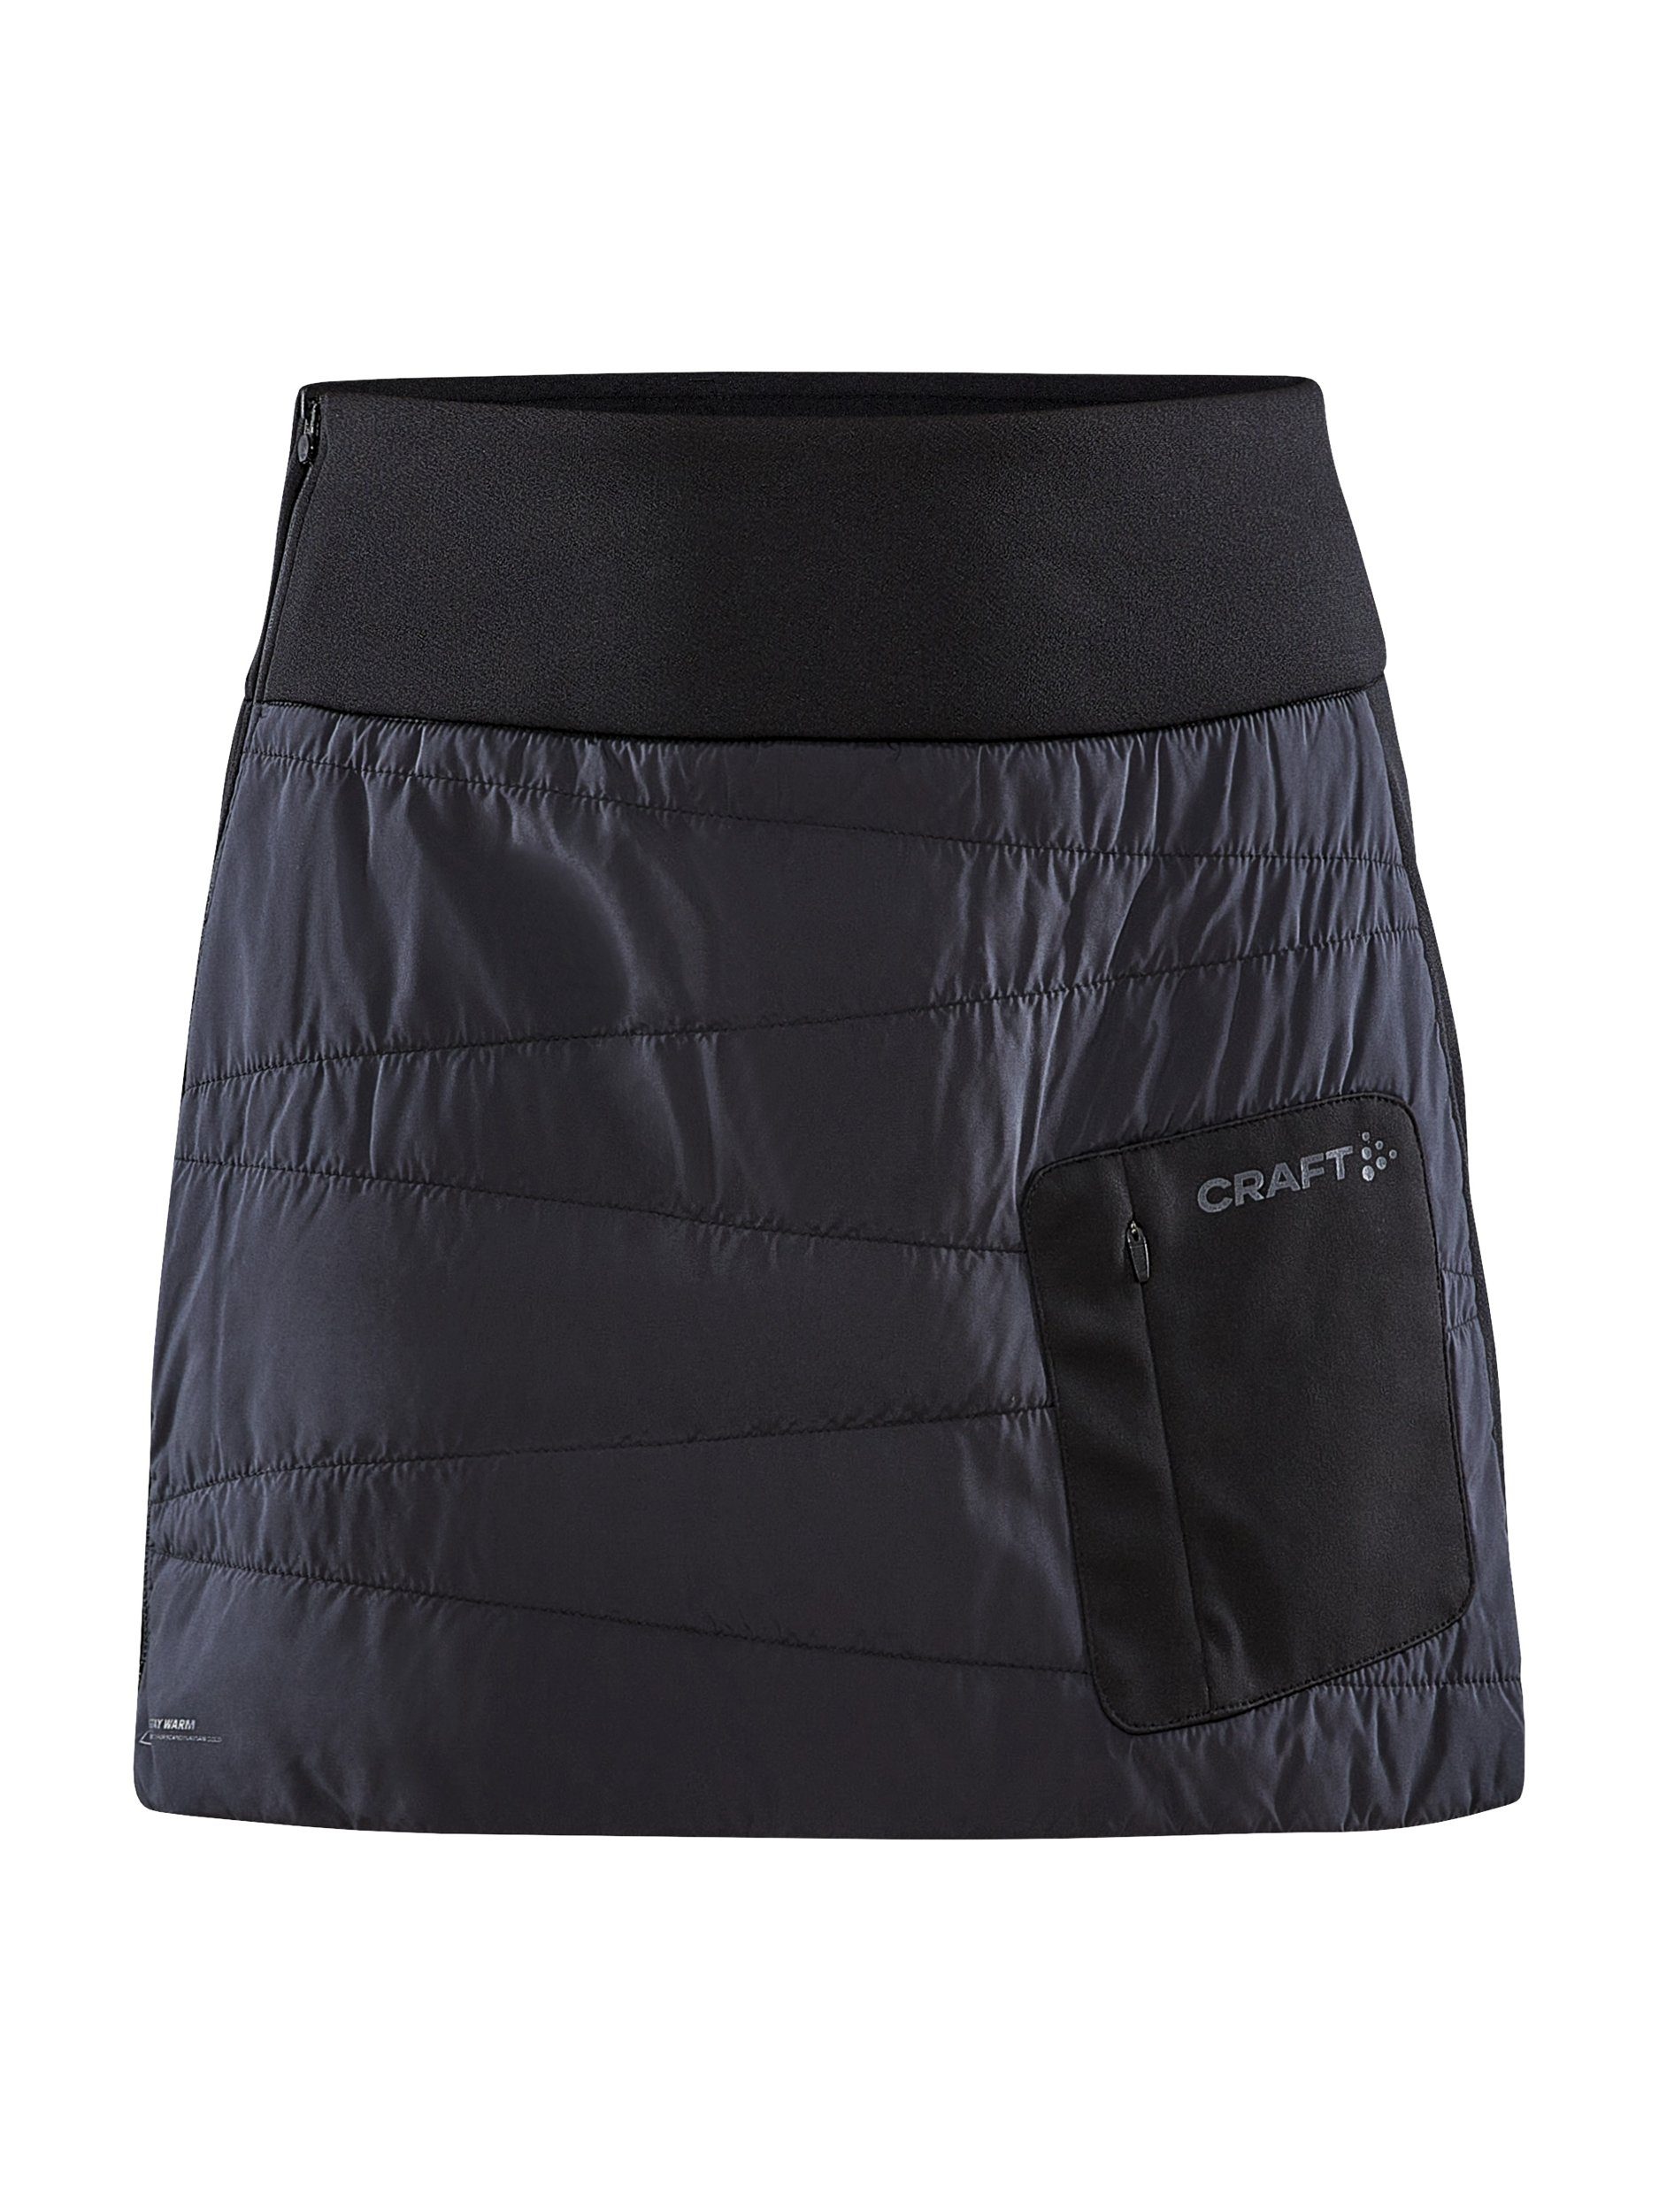 SKIRT NORDIC INSULATE BLACK CORE Funktionshose 999000 Craft TRAINING